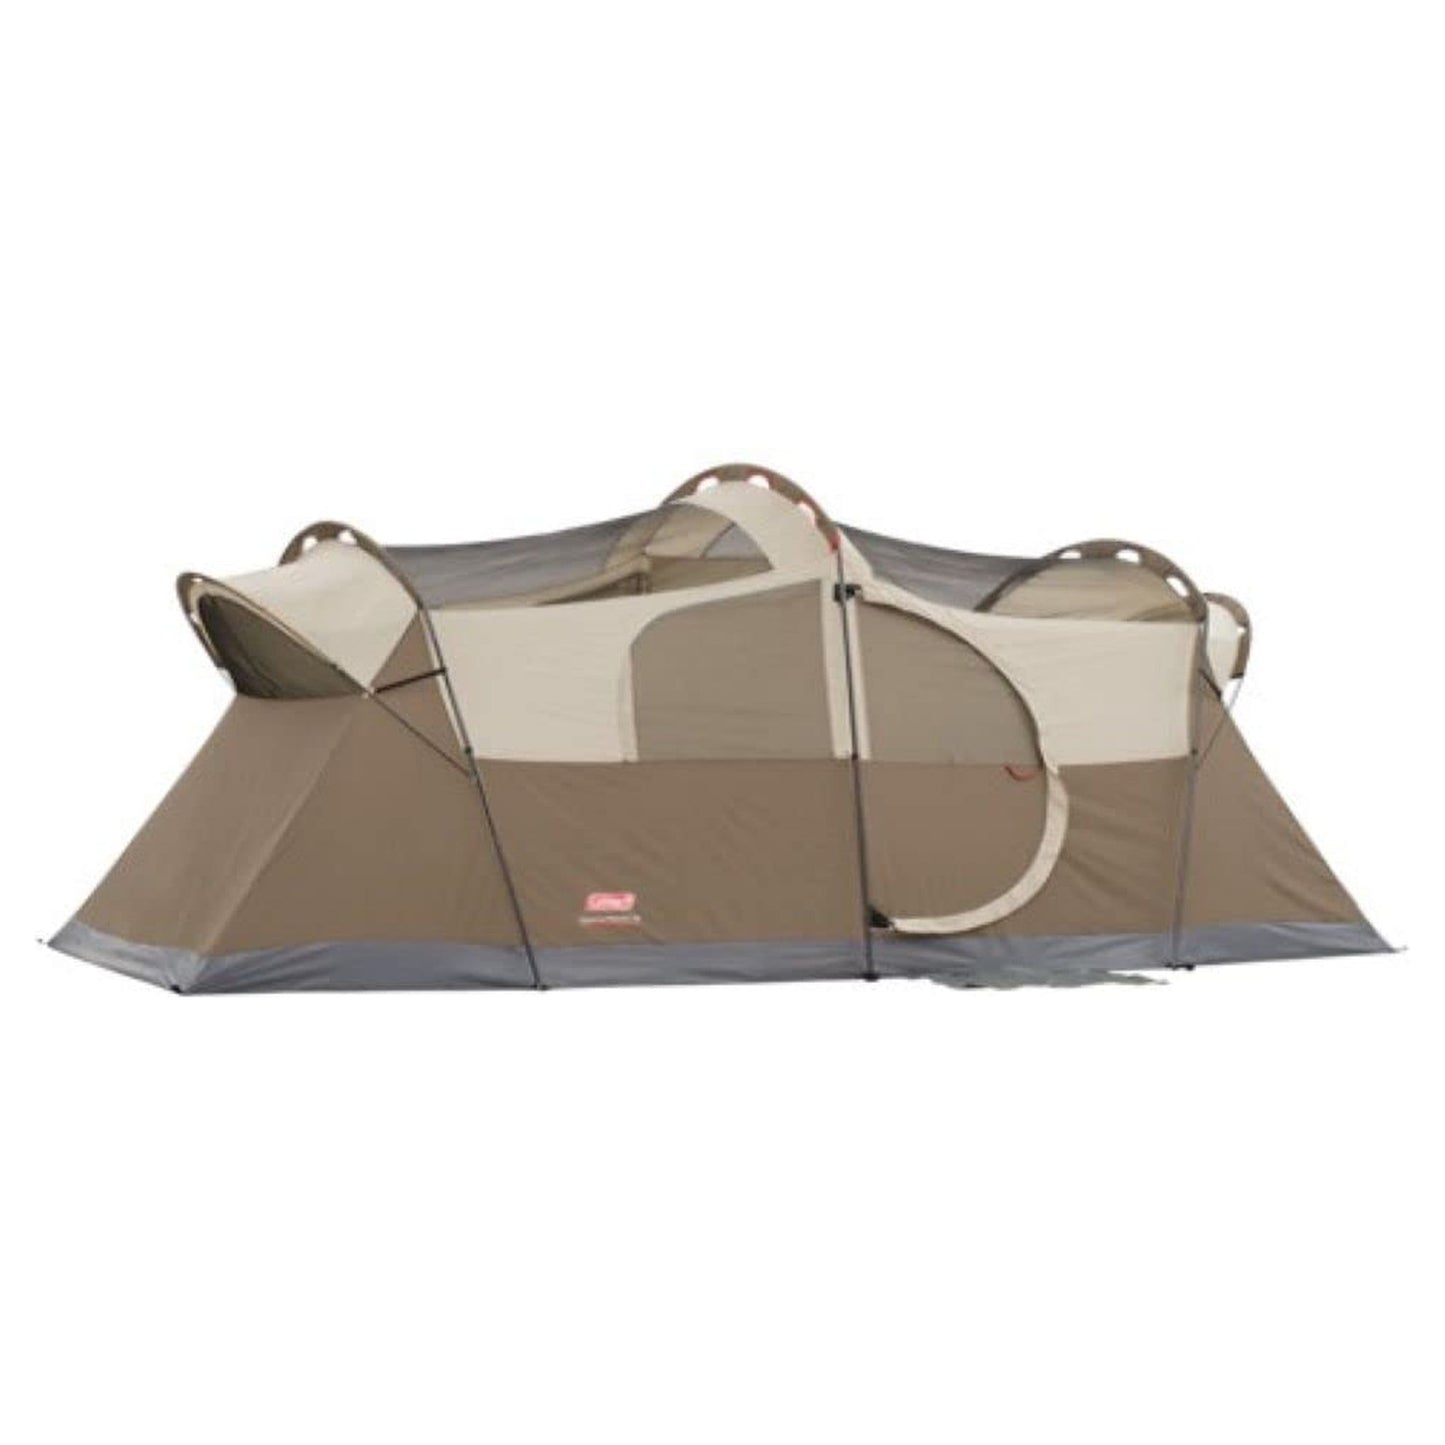 Weathermaster 10-Person Camping Tent